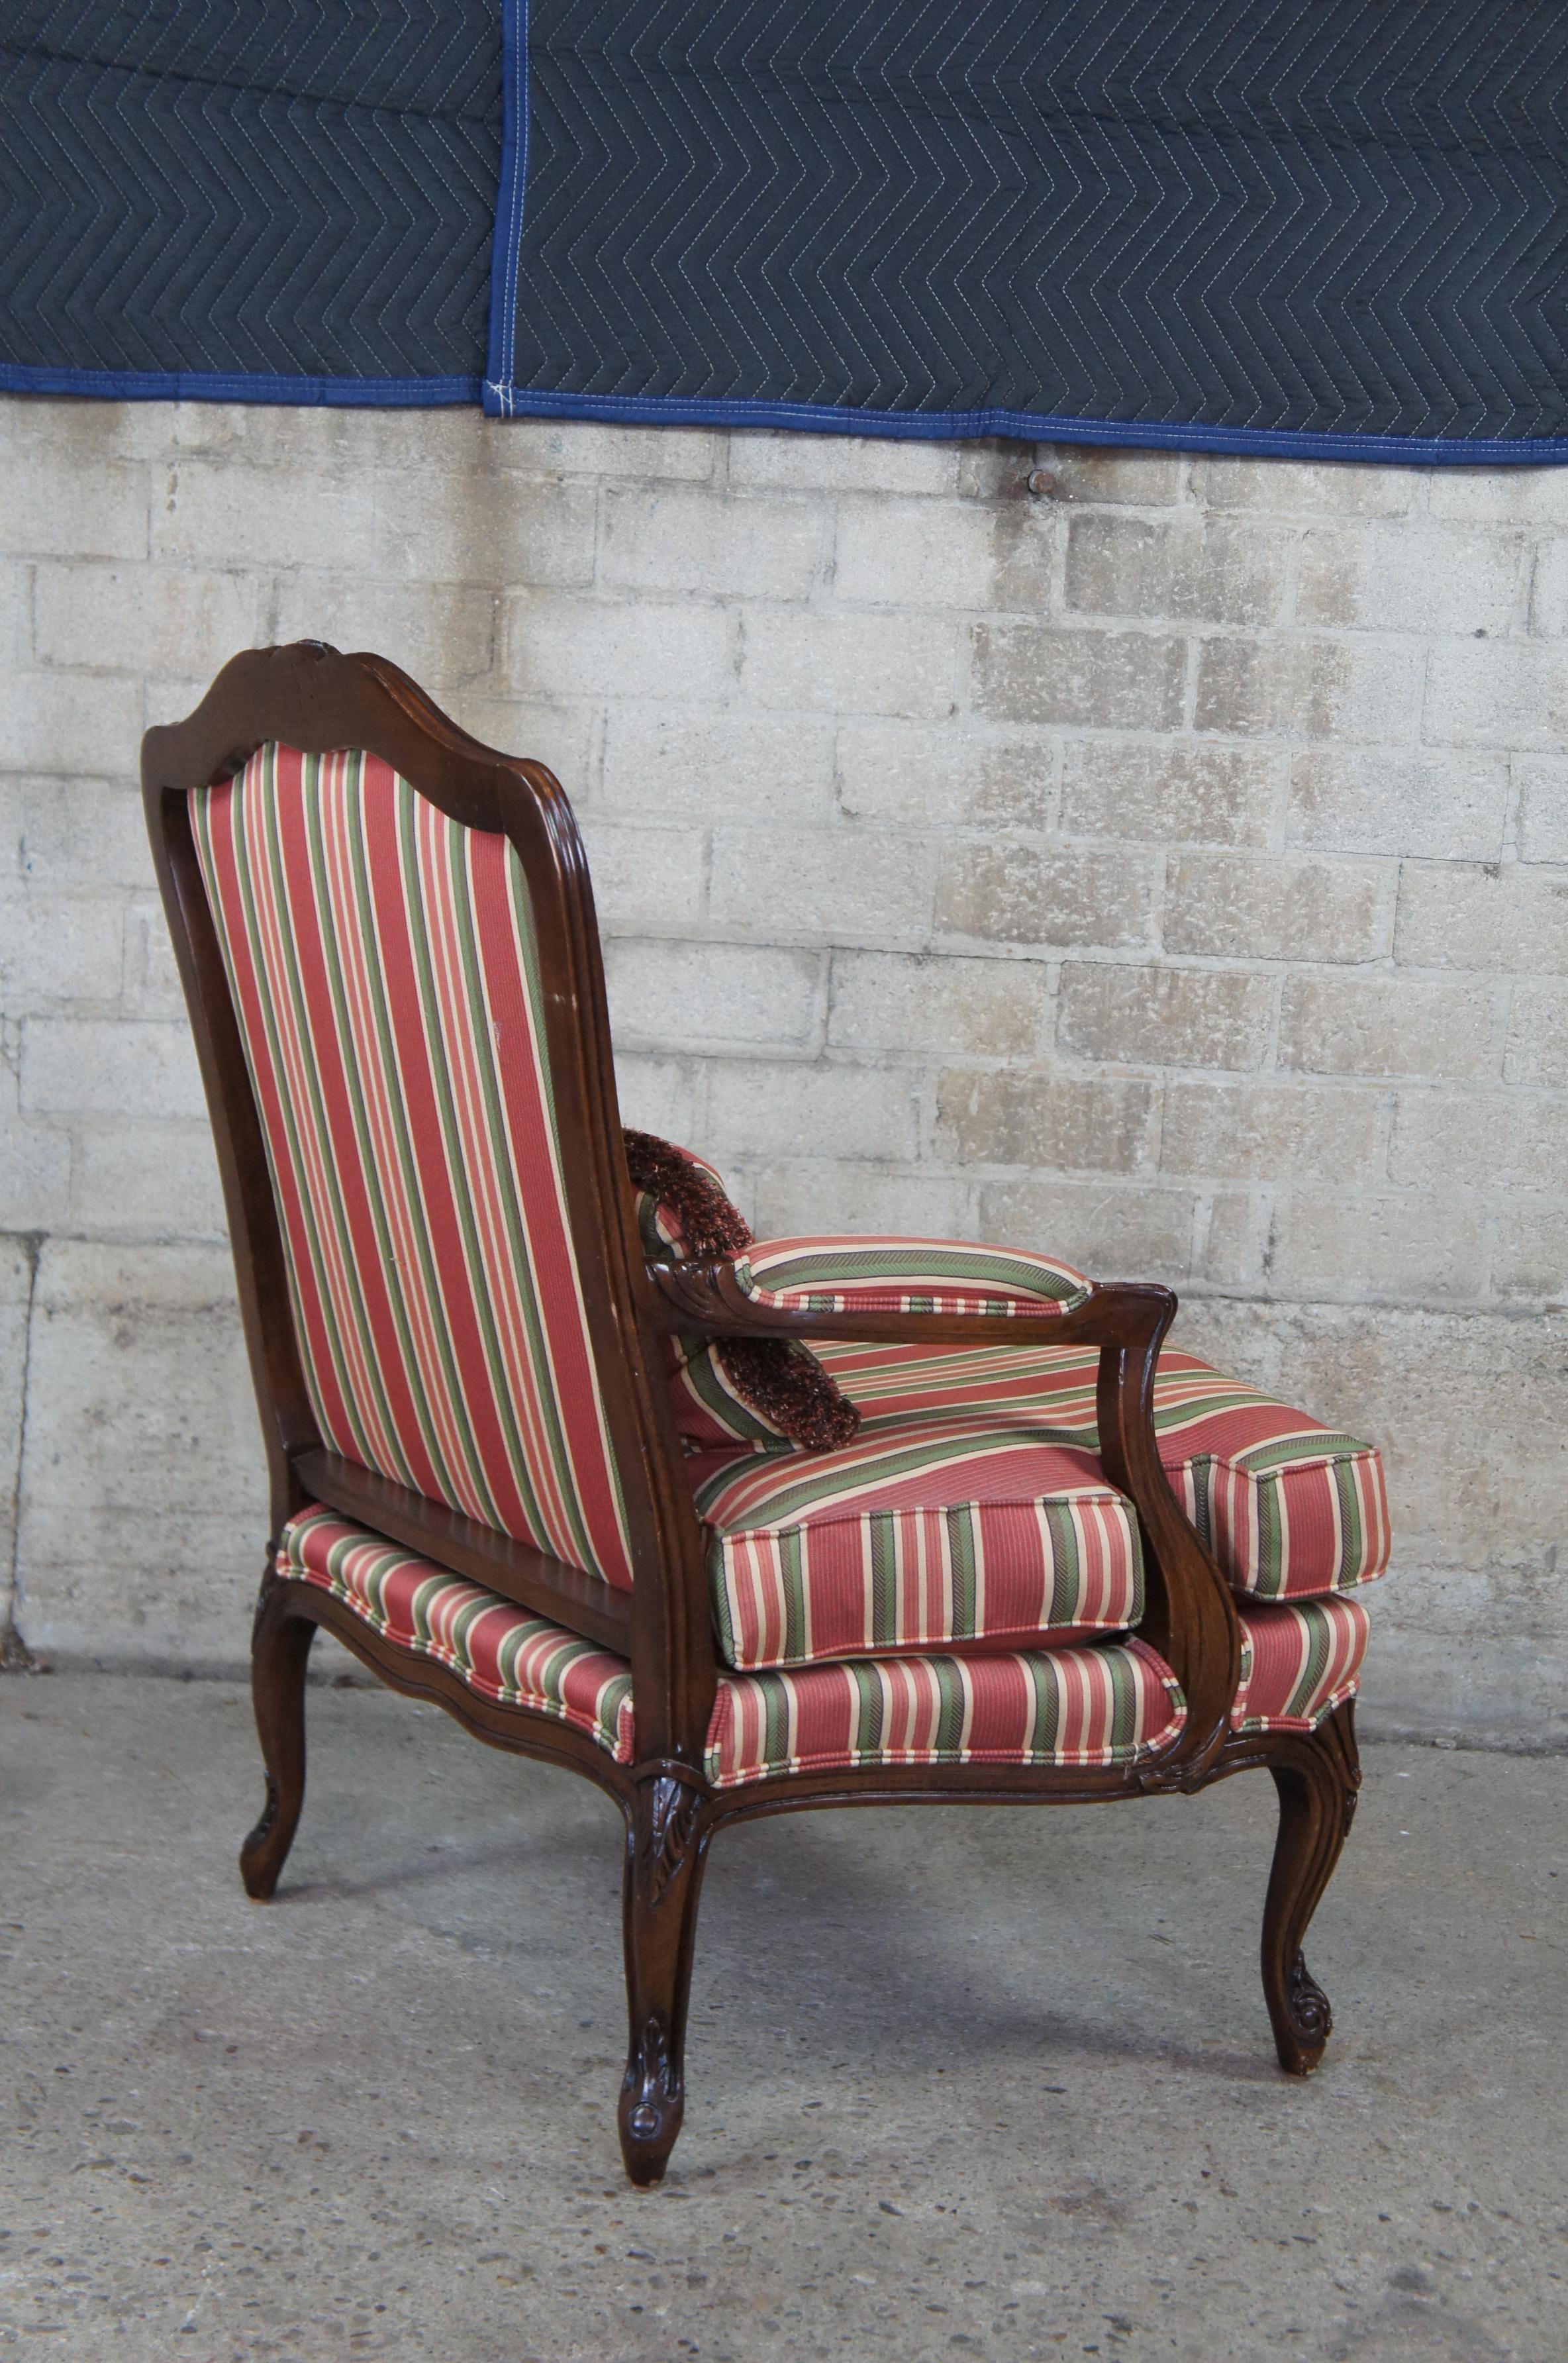 20th Century Vintage French Louis XV Walnut Fauteuil Library Arm Chair Striped Upholstery